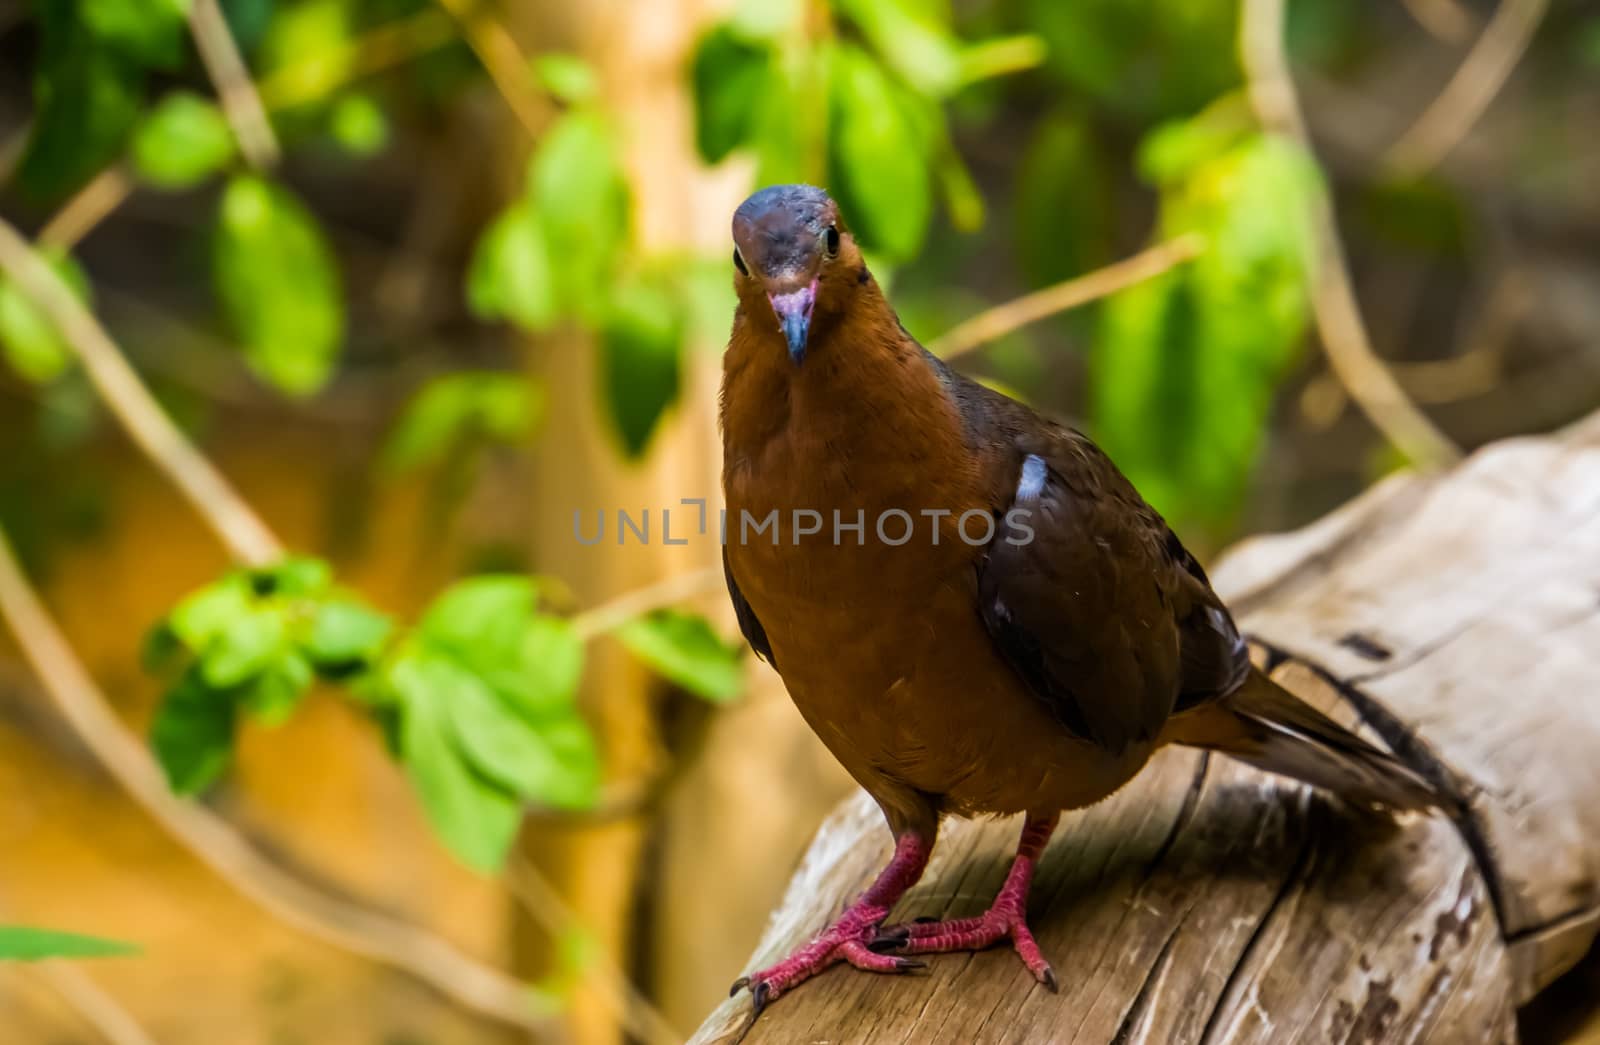 closeup portrait from the front of a socorro dove, Pigeon that is extinct in the wild, Tropical bird specie that lived on socorro island, Mexico by charlottebleijenberg